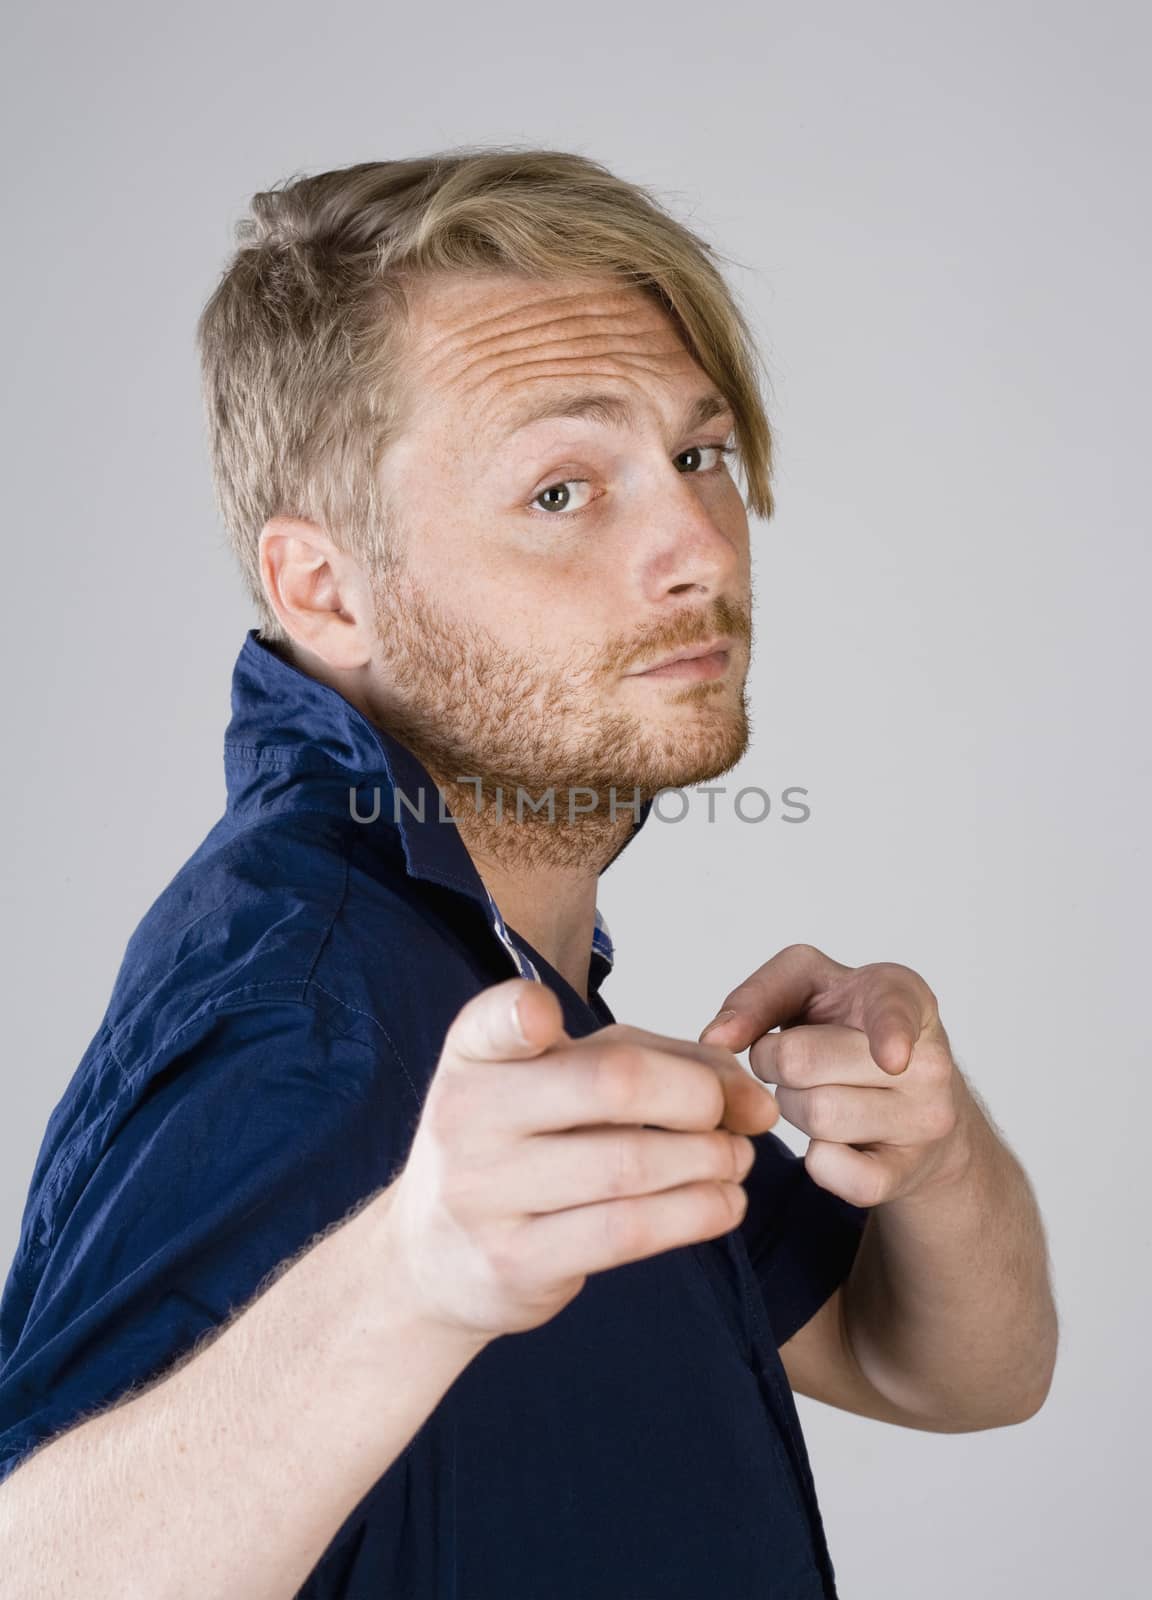 Young Man Making a Pointing Gesture with his Fingers